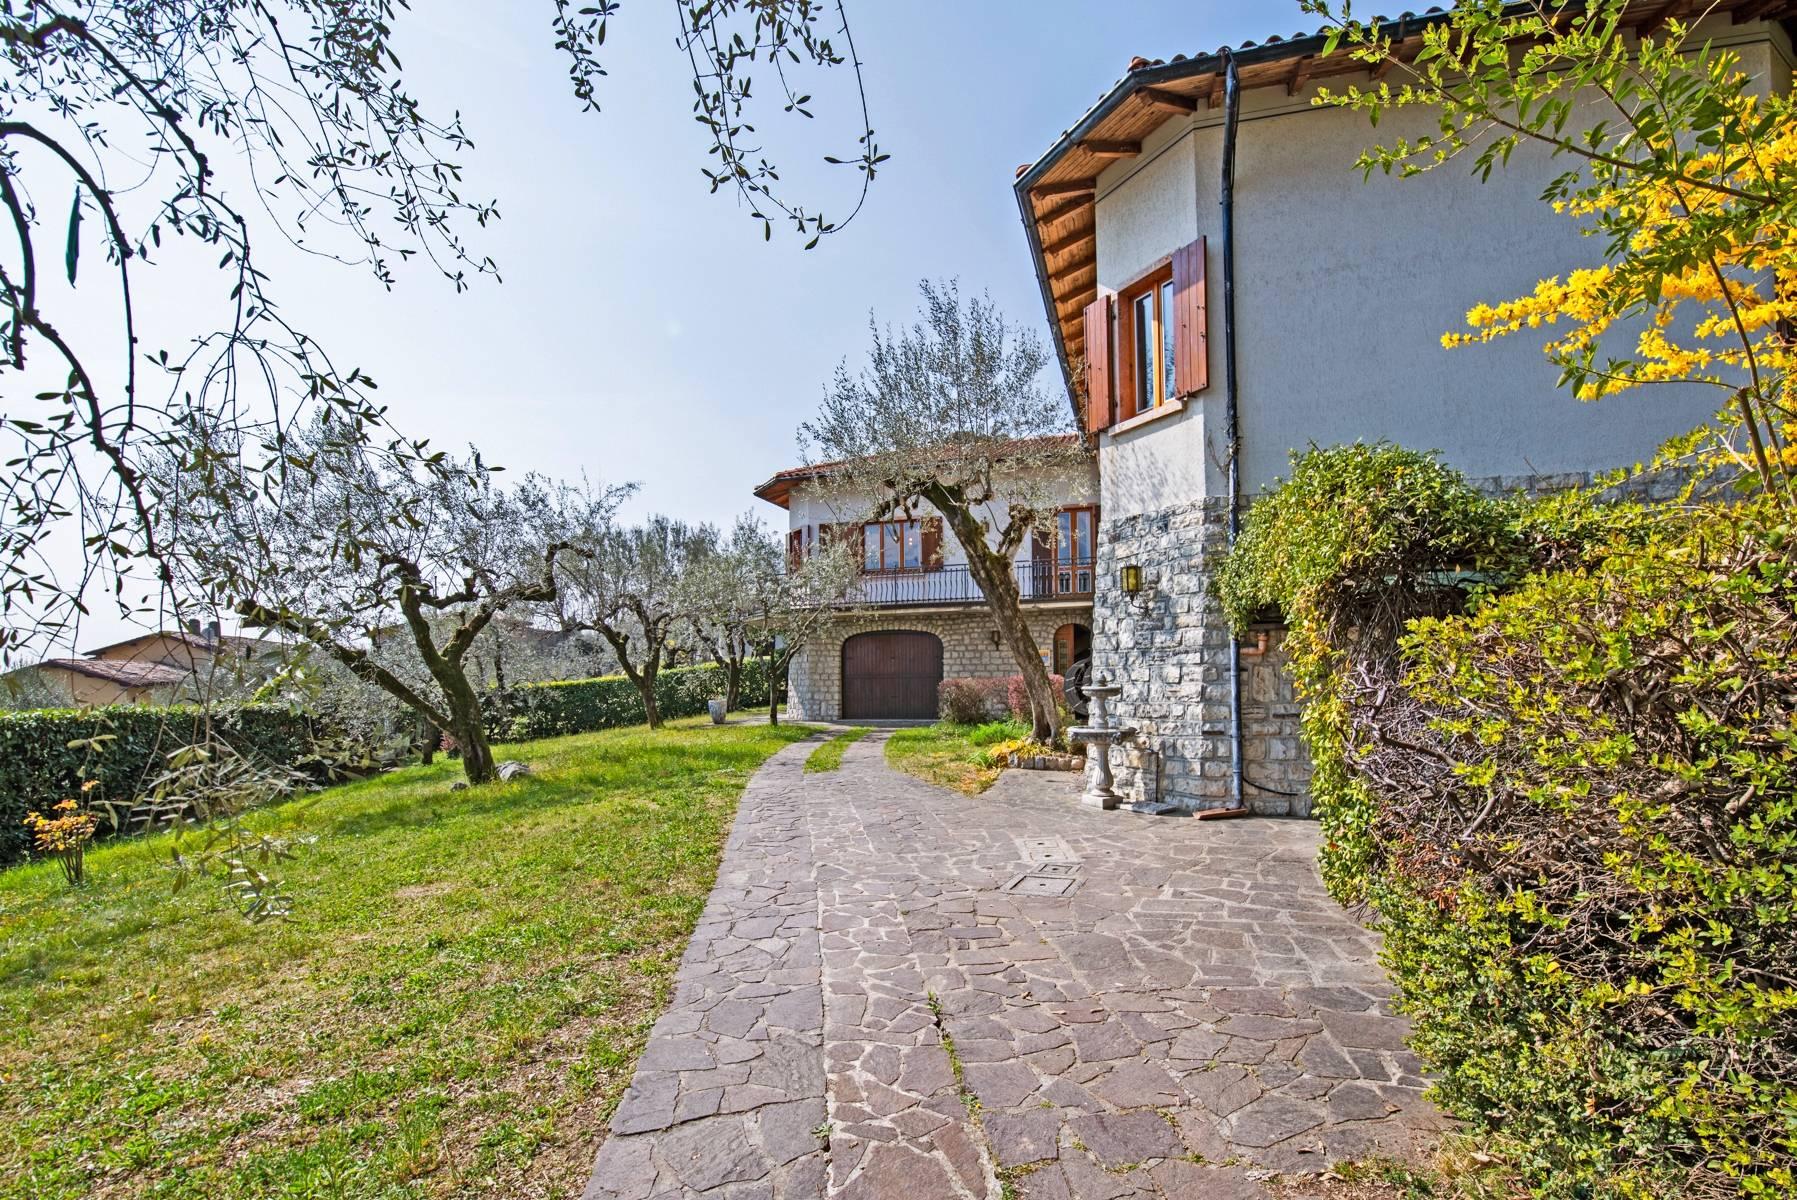 Villa with lake view in Gargnano surrounded by olive trees - 33